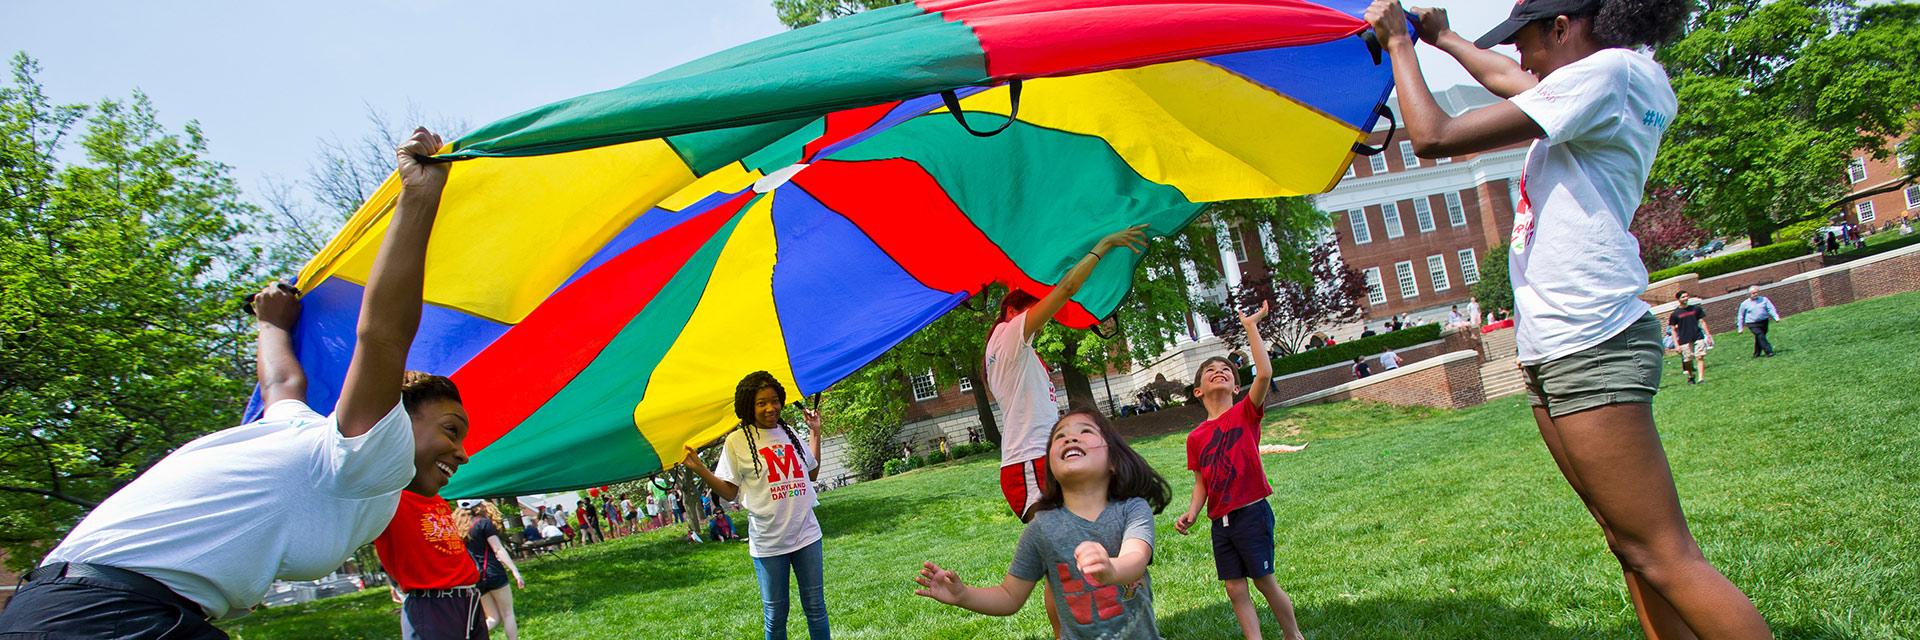 Maryland Day at UMD, kids and students playing parachute games.